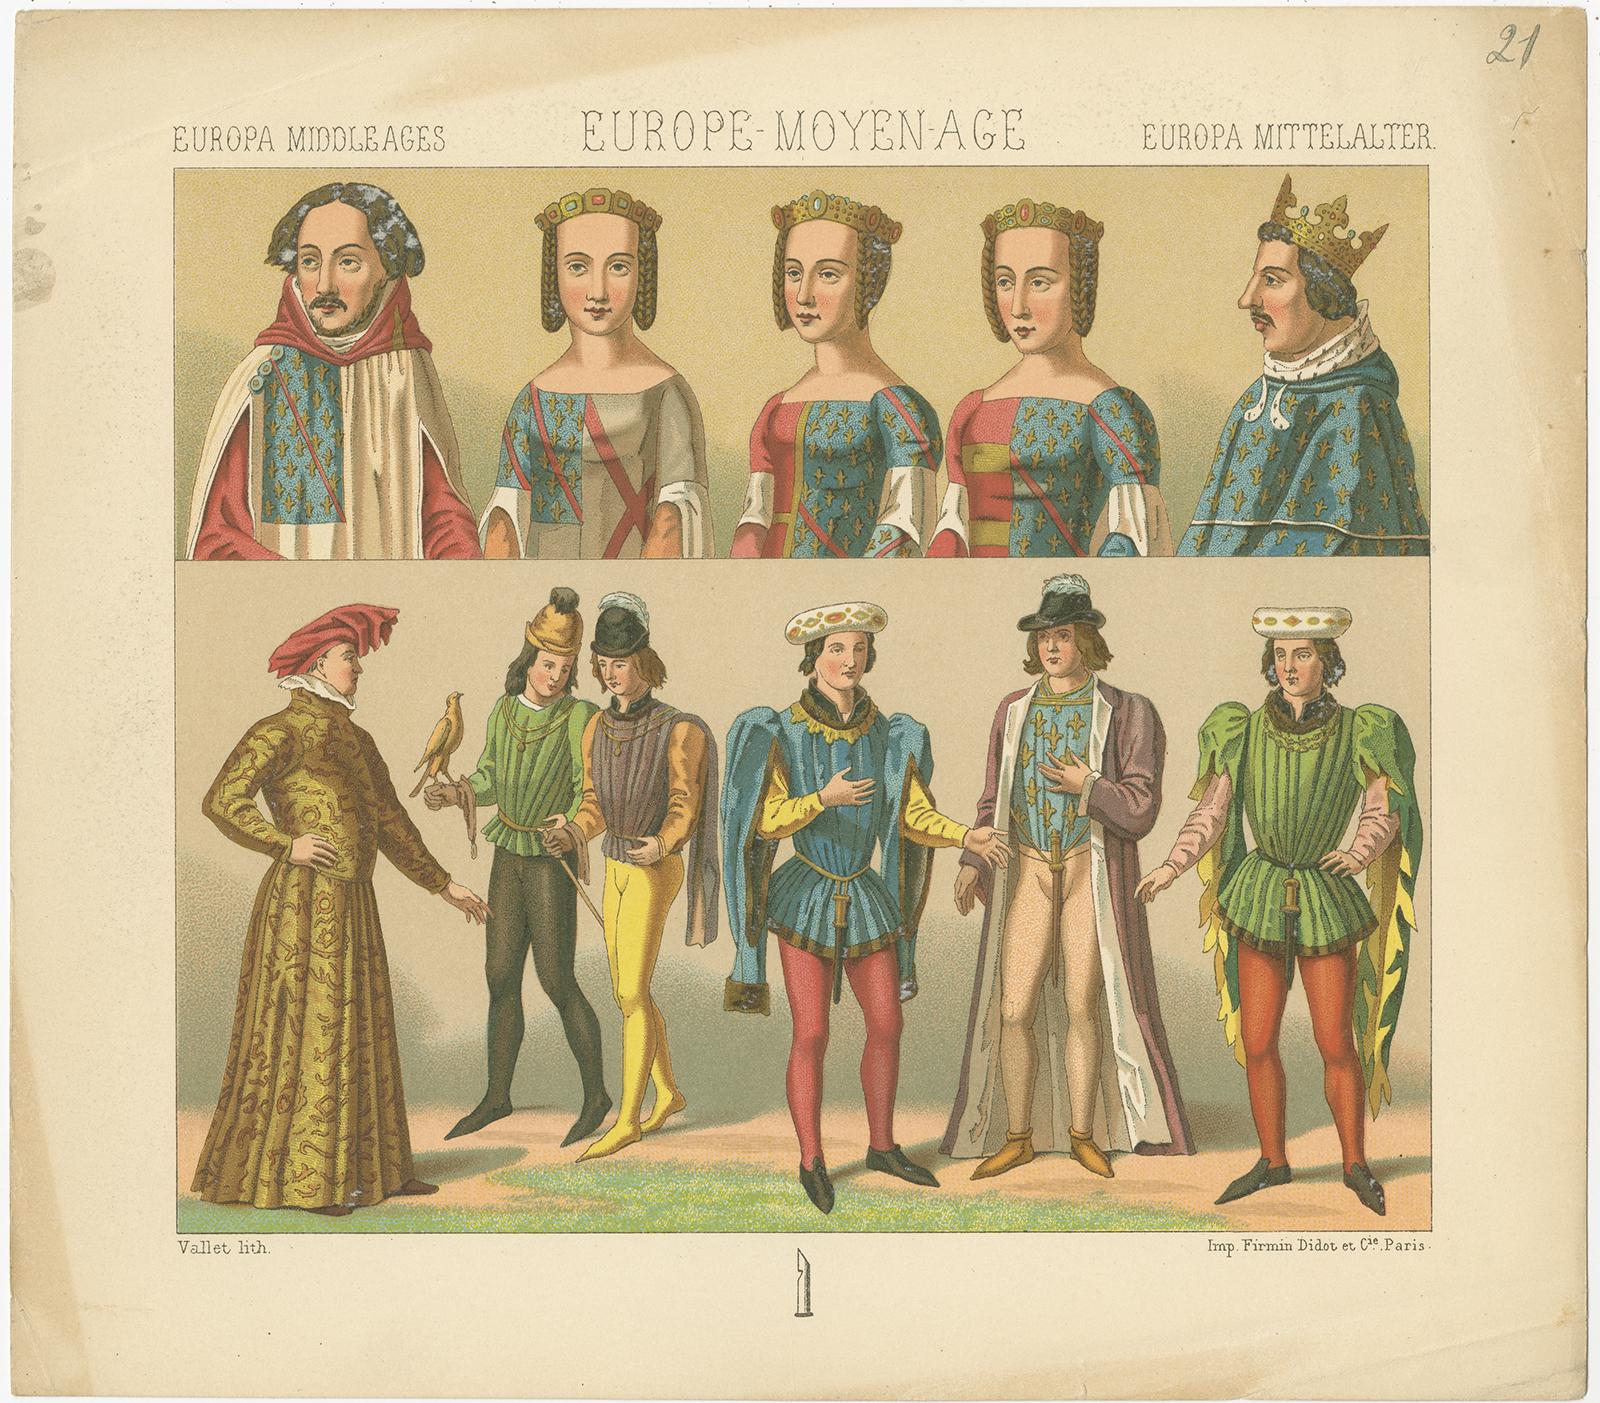 Antique print titled 'Europa Middle Ages - Europe Moyen Age- Europa Mittelalter'. Chromolithograph of European Costumes. This print originates from 'Le Costume Historique' by M.A. Racinet. Published circa 1880.